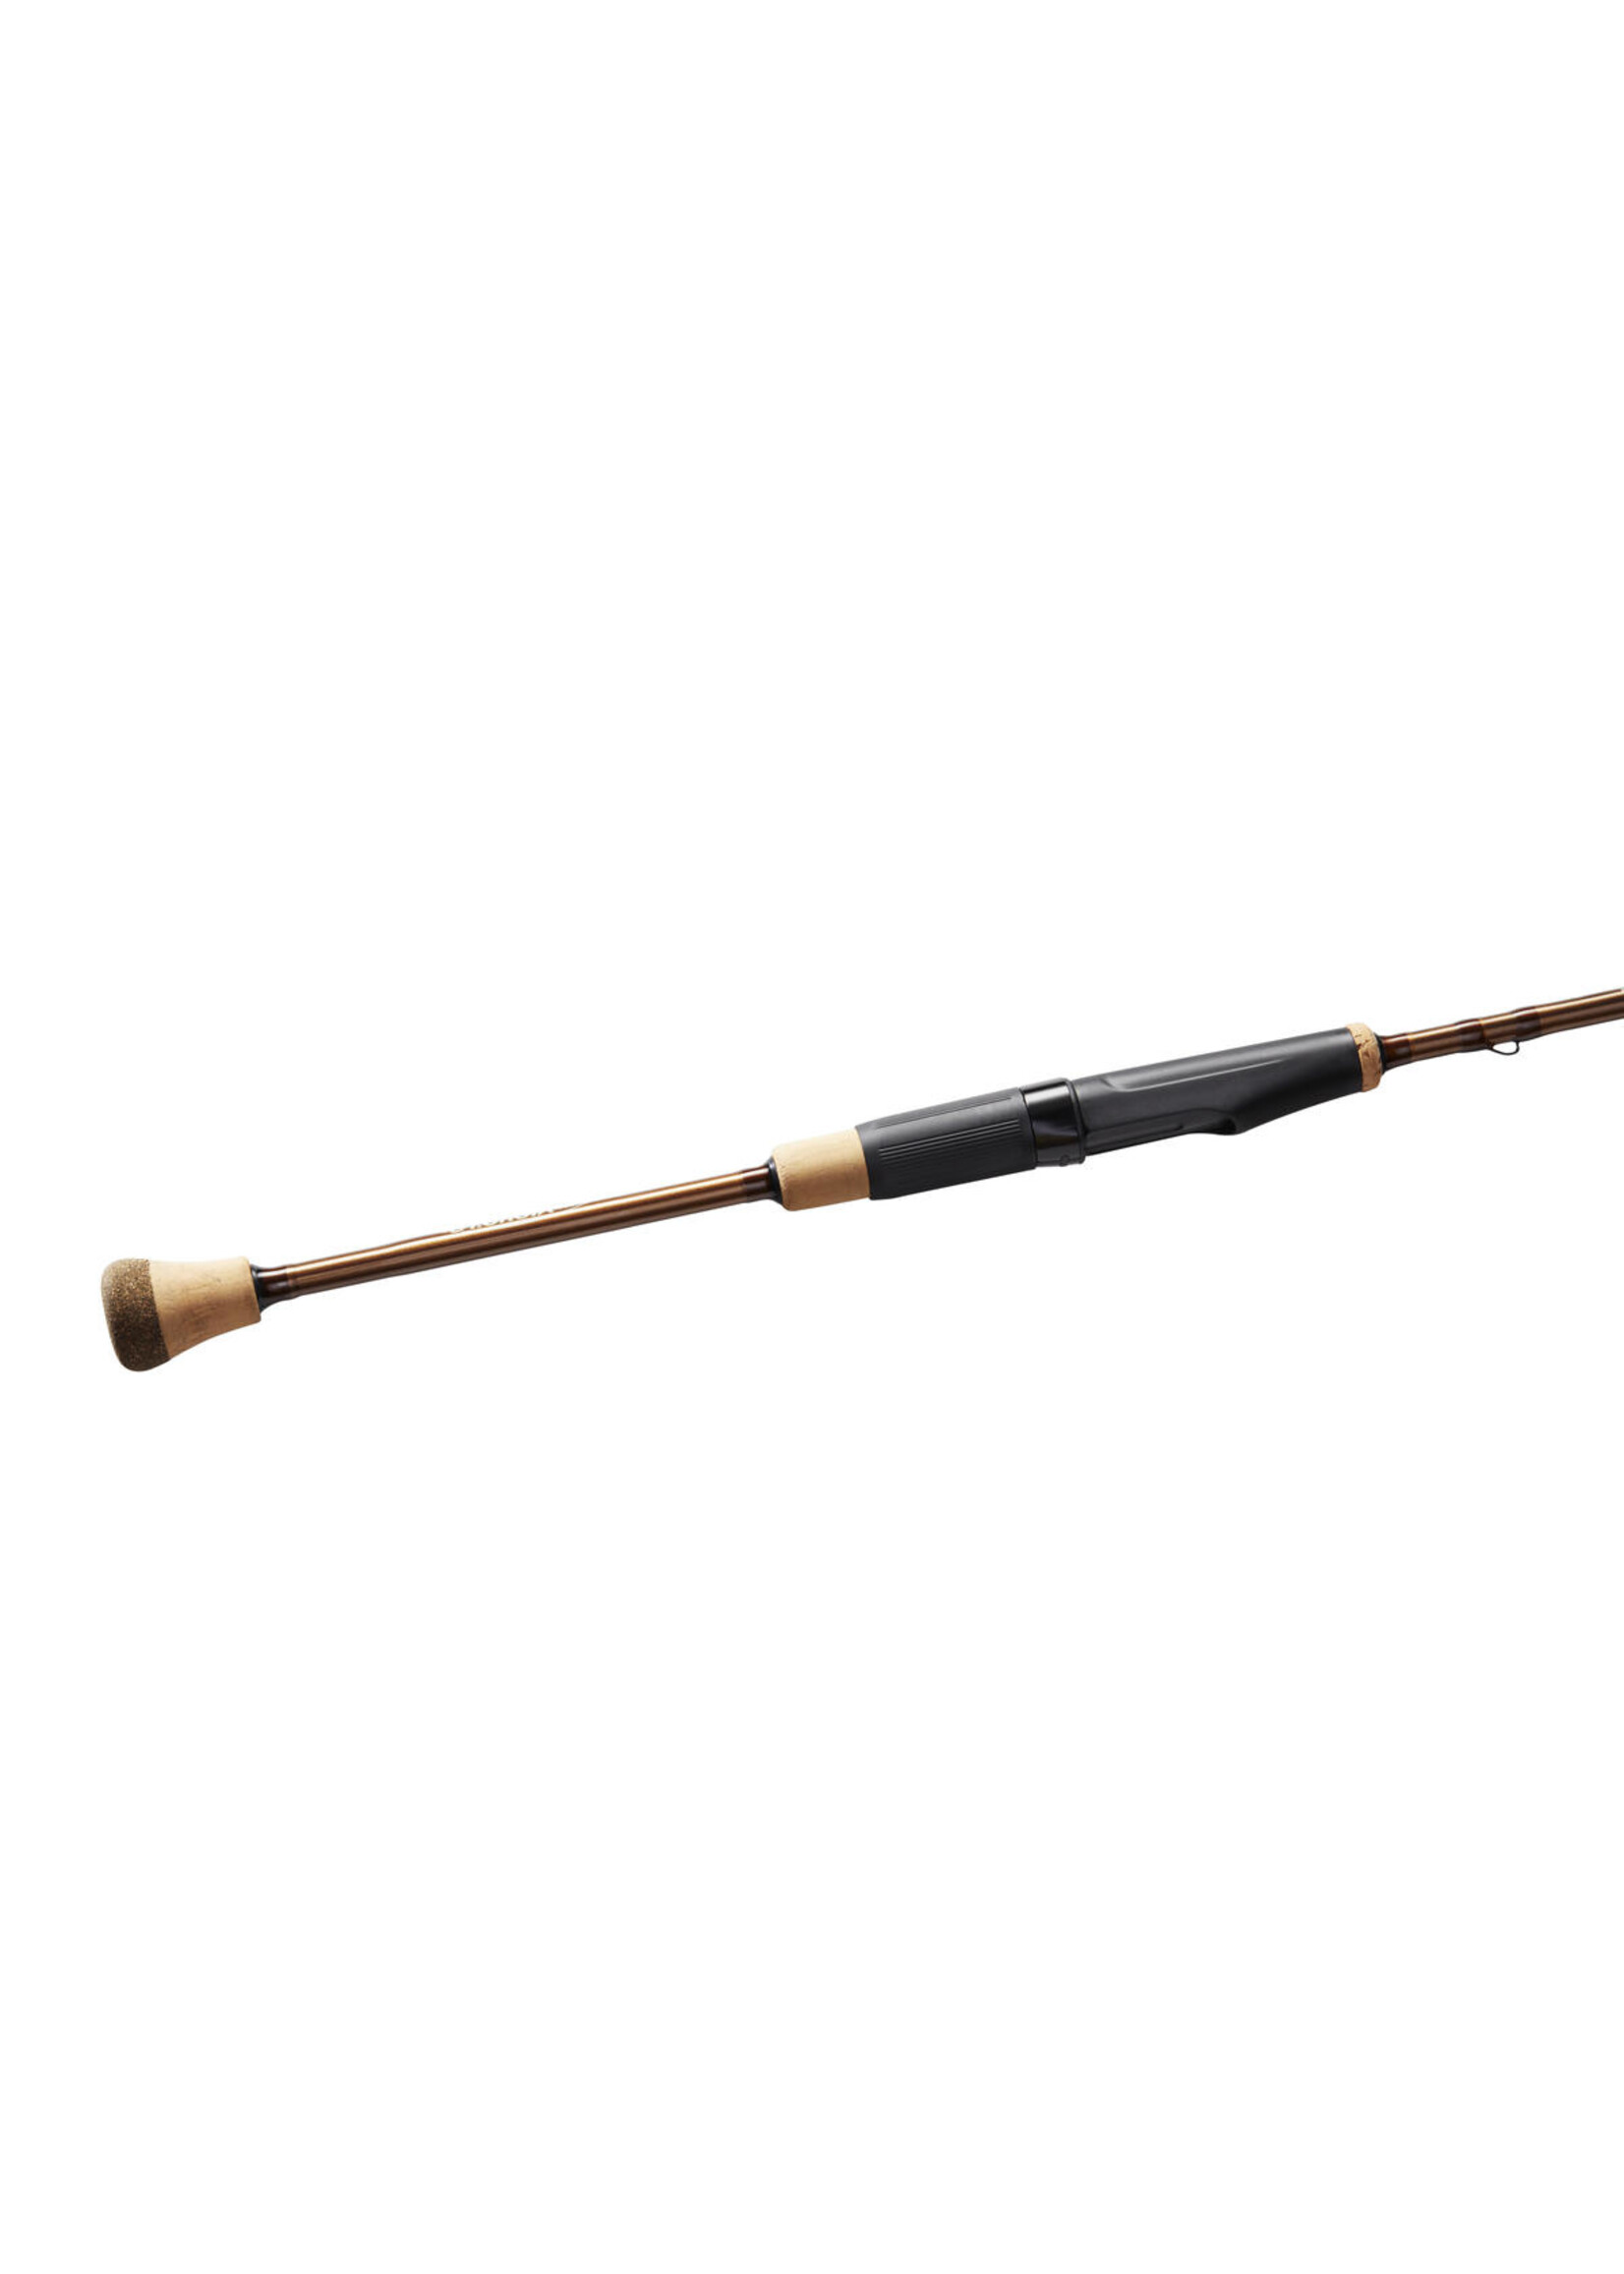 St. Croix St. Croix Panfish Series Spinning Rods